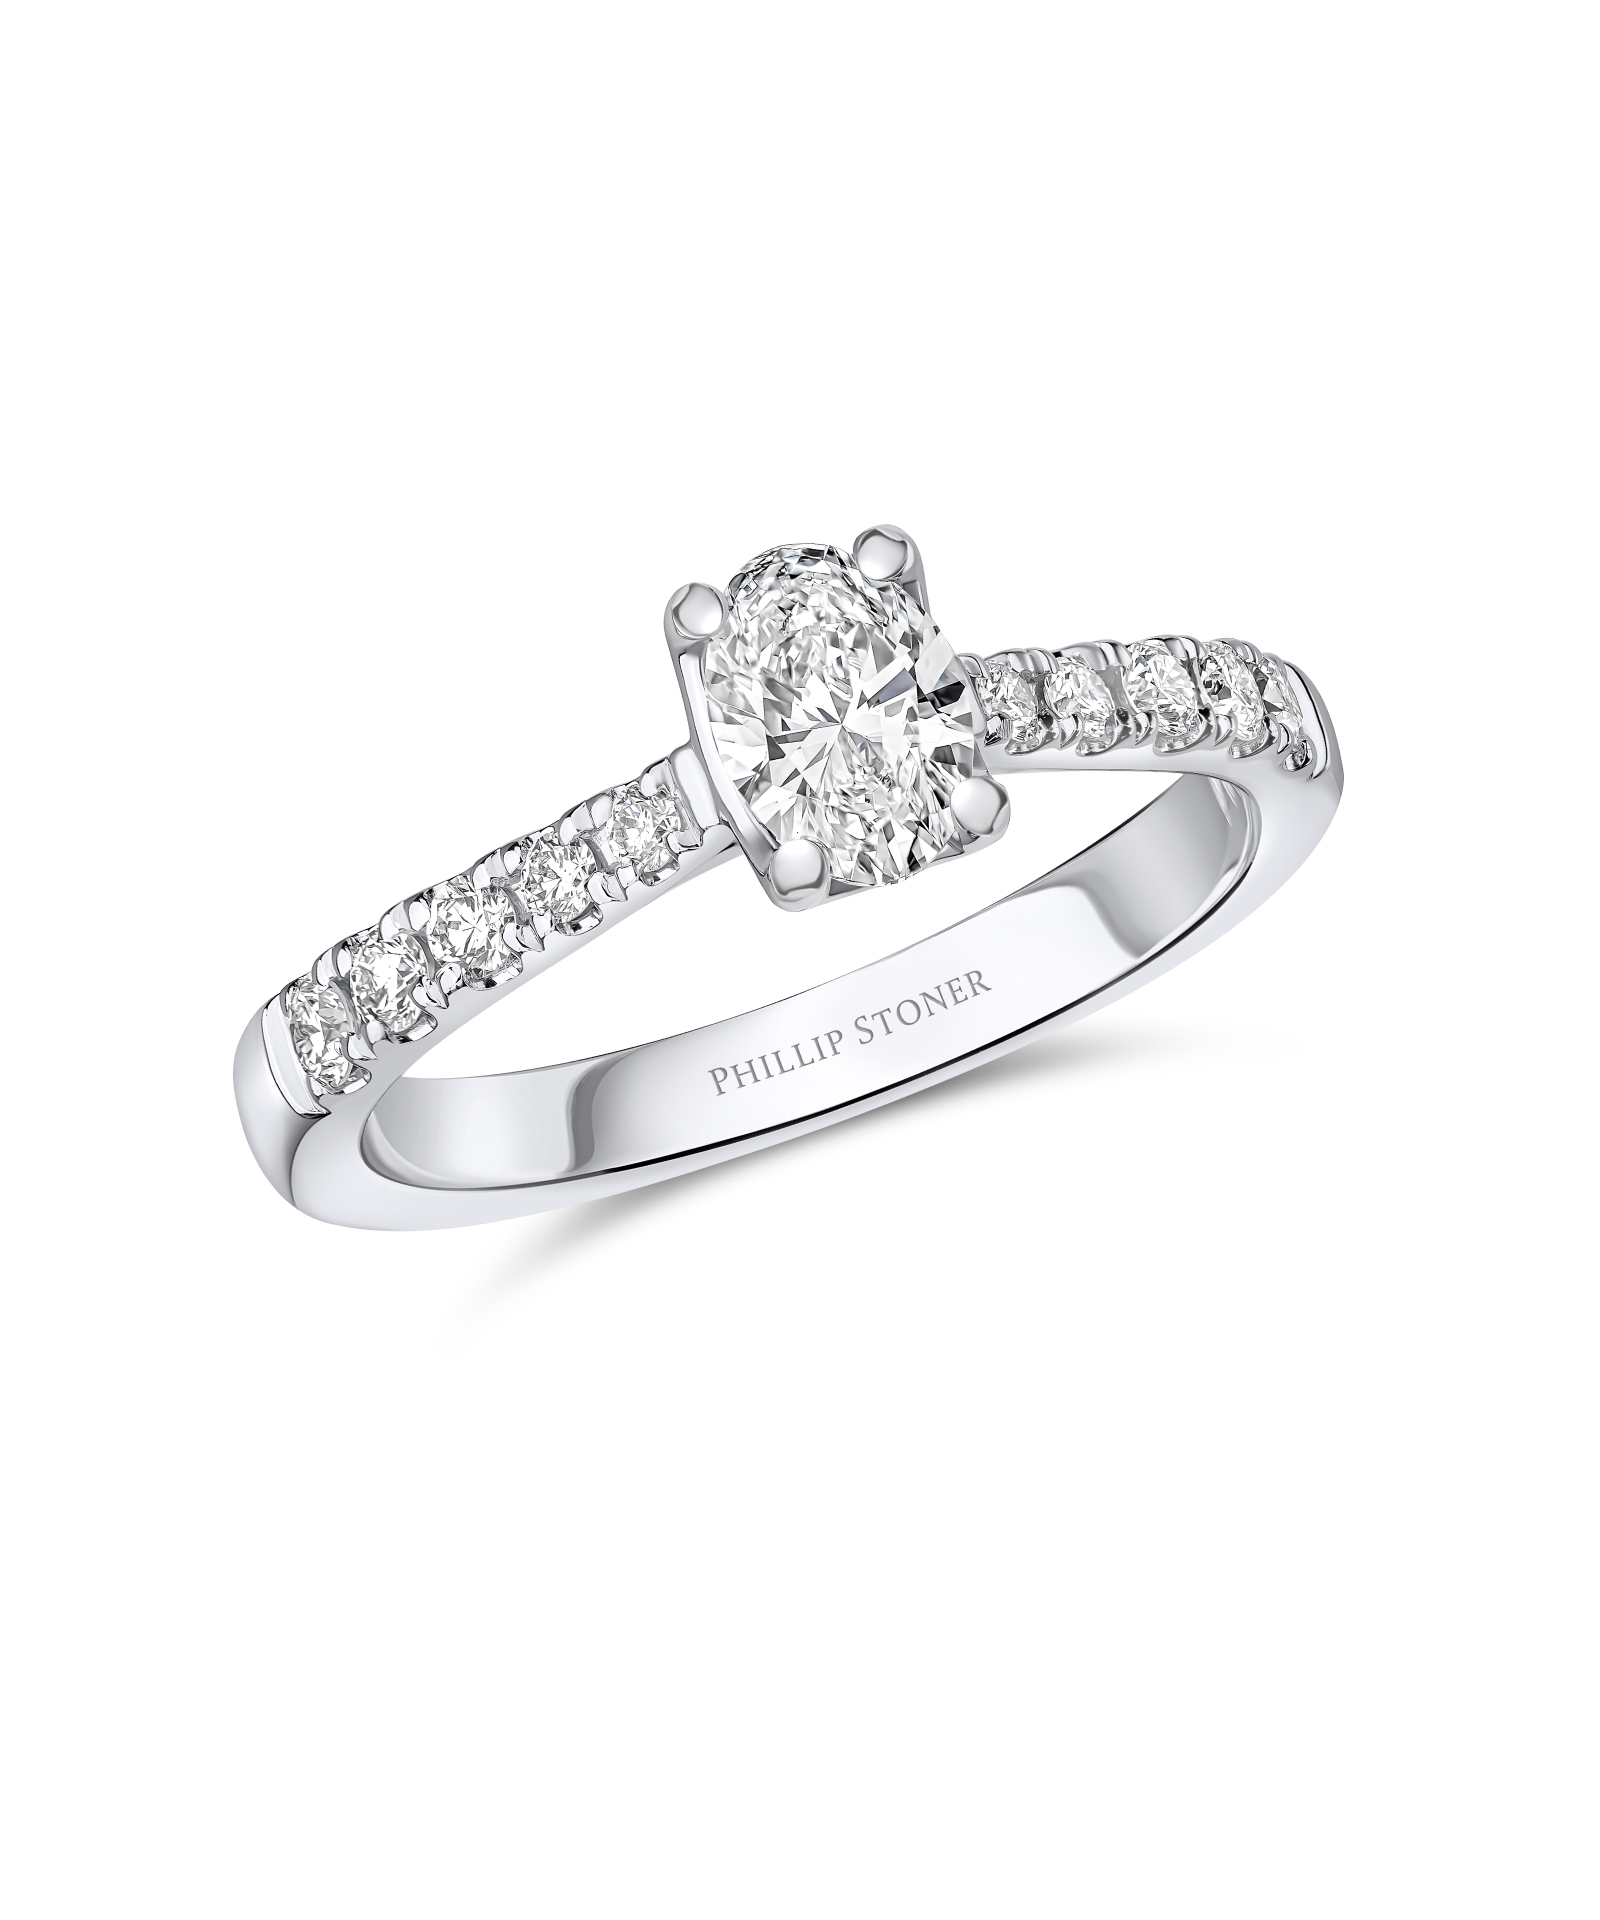 0.50ct Oval Cut Diamond Engagement Ring with Scallop Set Shoulders - Phillip Stoner The Jeweller